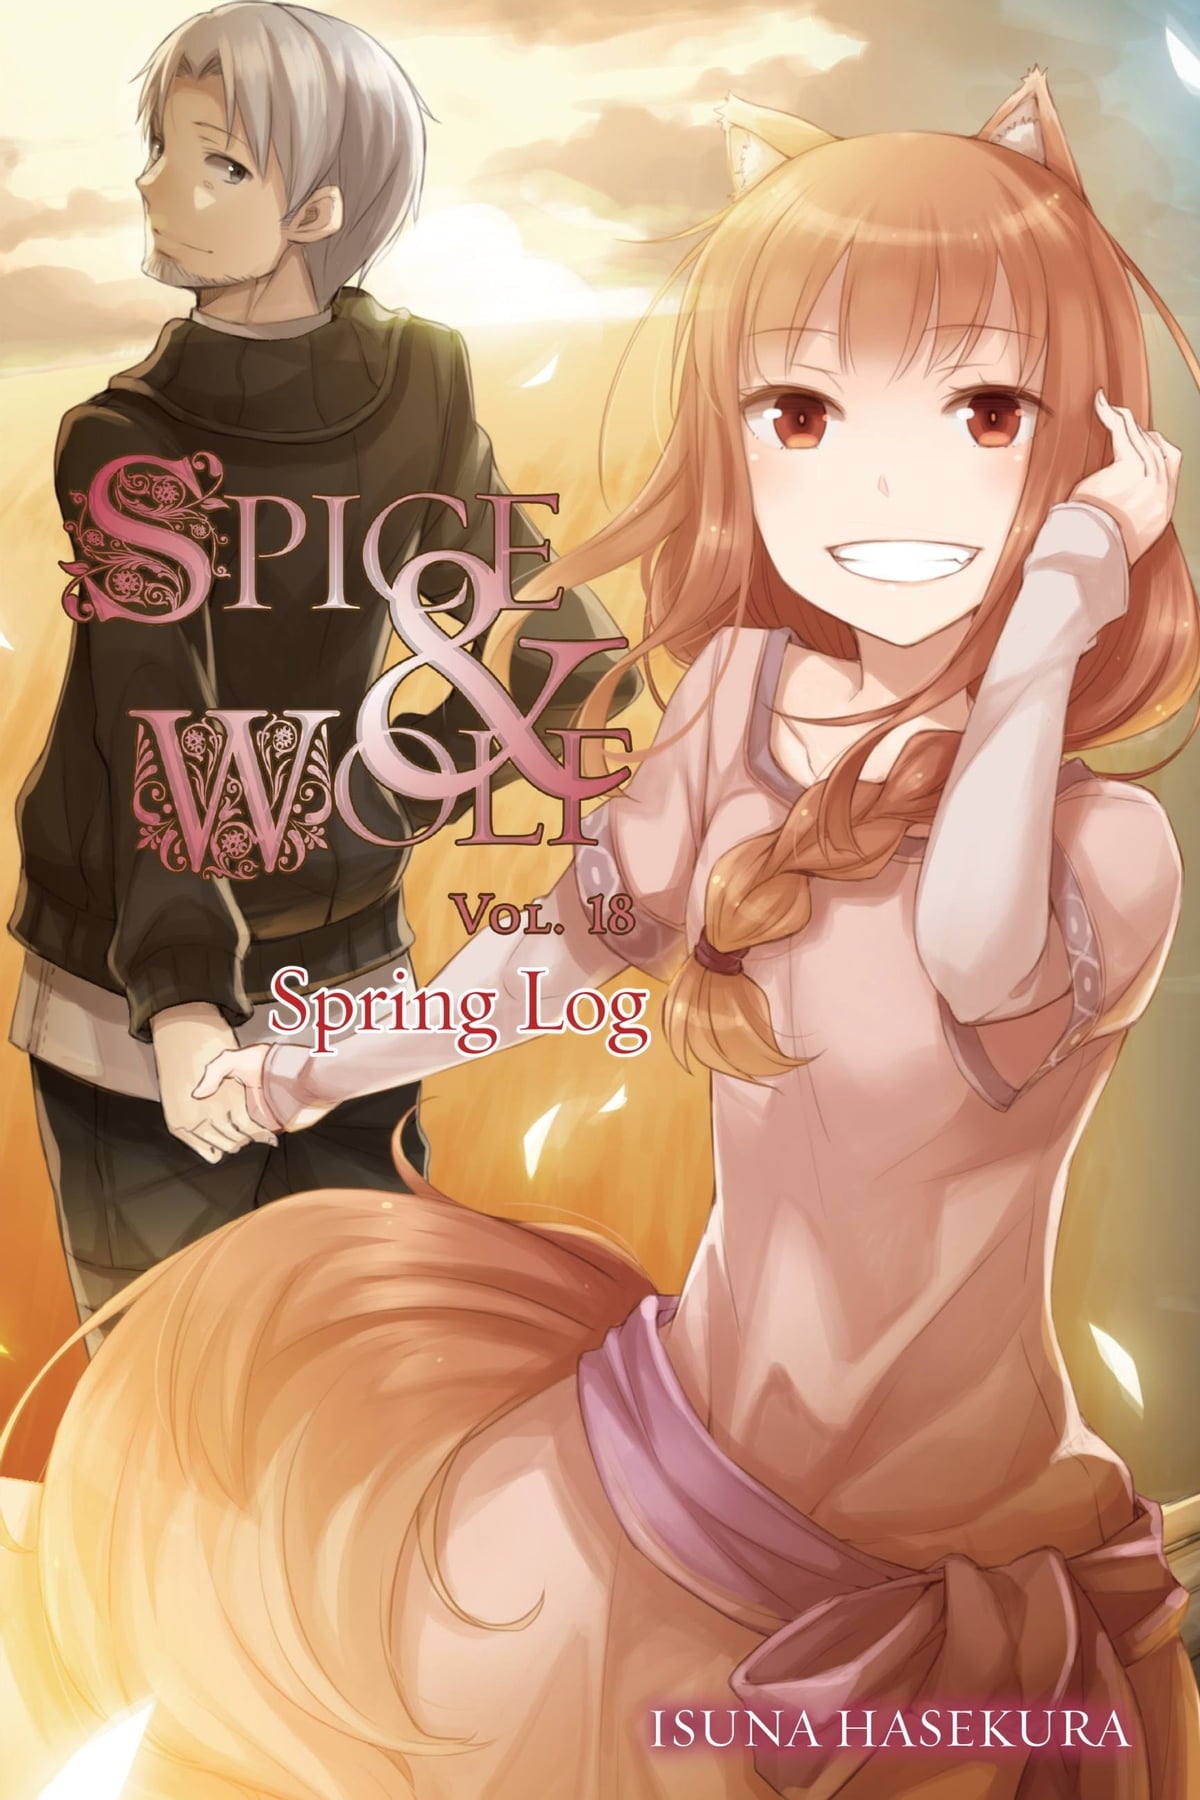 Spice and Wolf Vol. 18: Spring Log